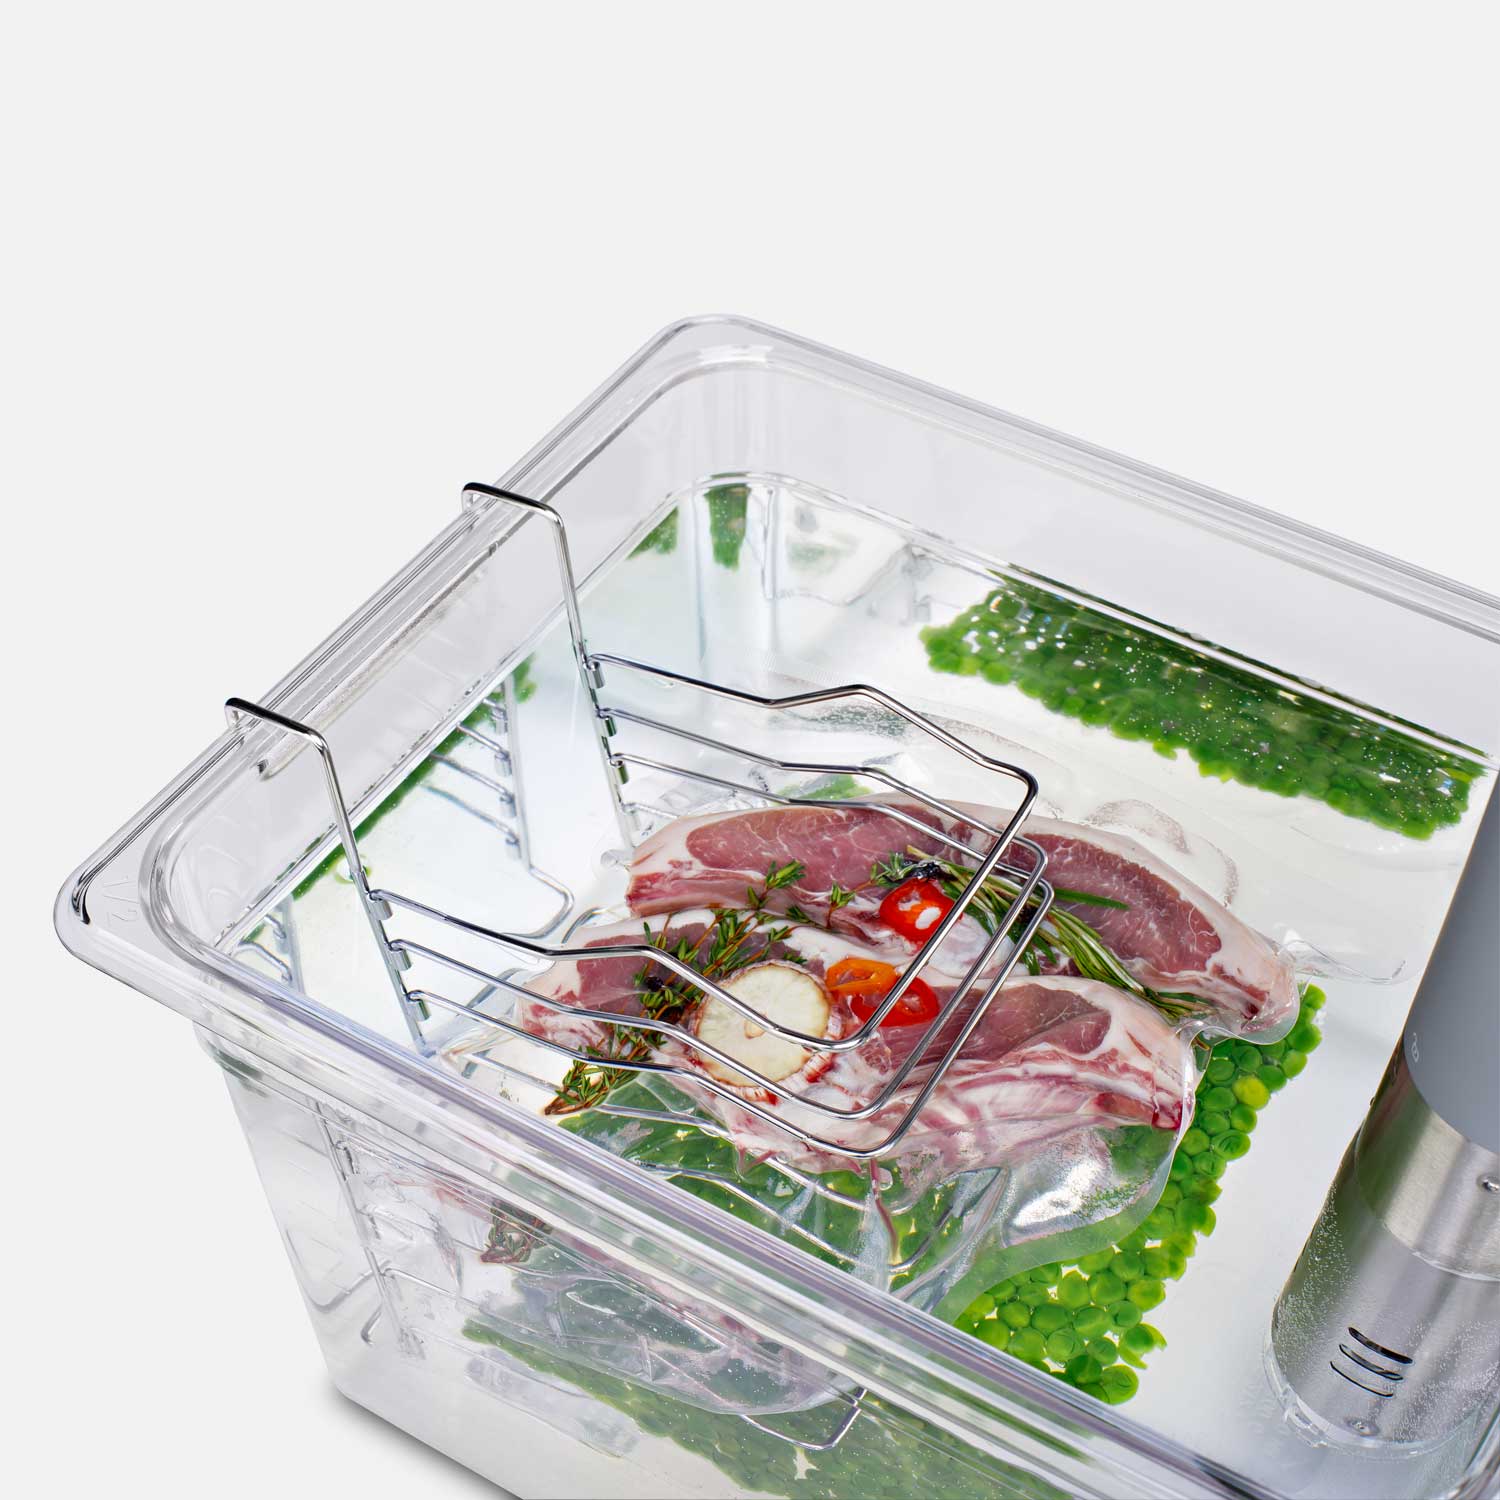 Small bag holder hung inside the sous-vide basin and filled with a vacuum-sealed bag of meat